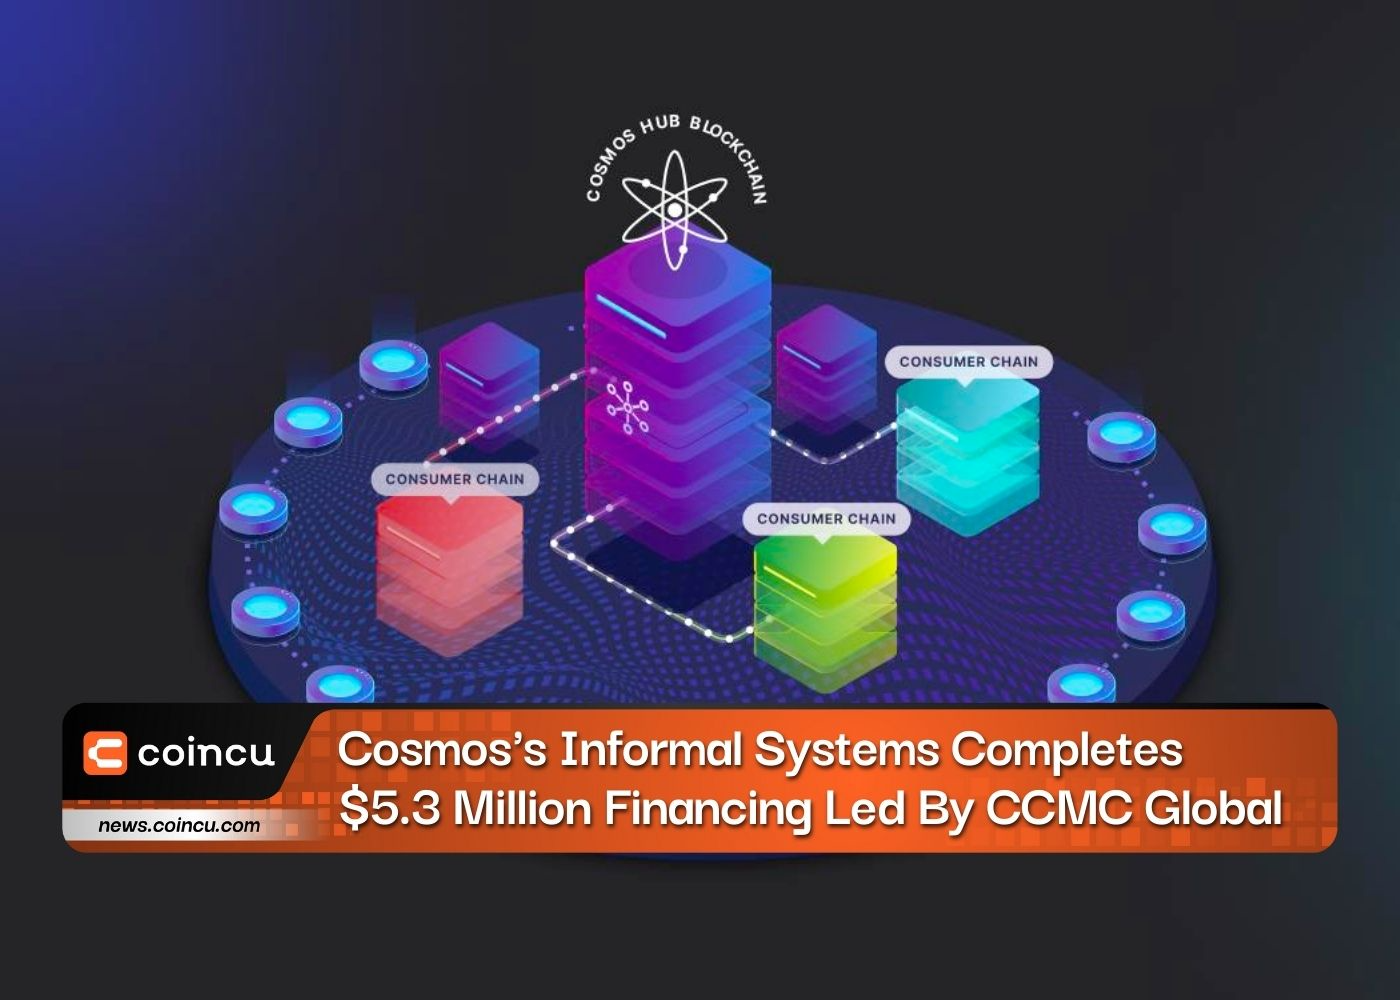 Cosmos's Informal Systems Completes $5.3 Million Financing Led By CCMC Global